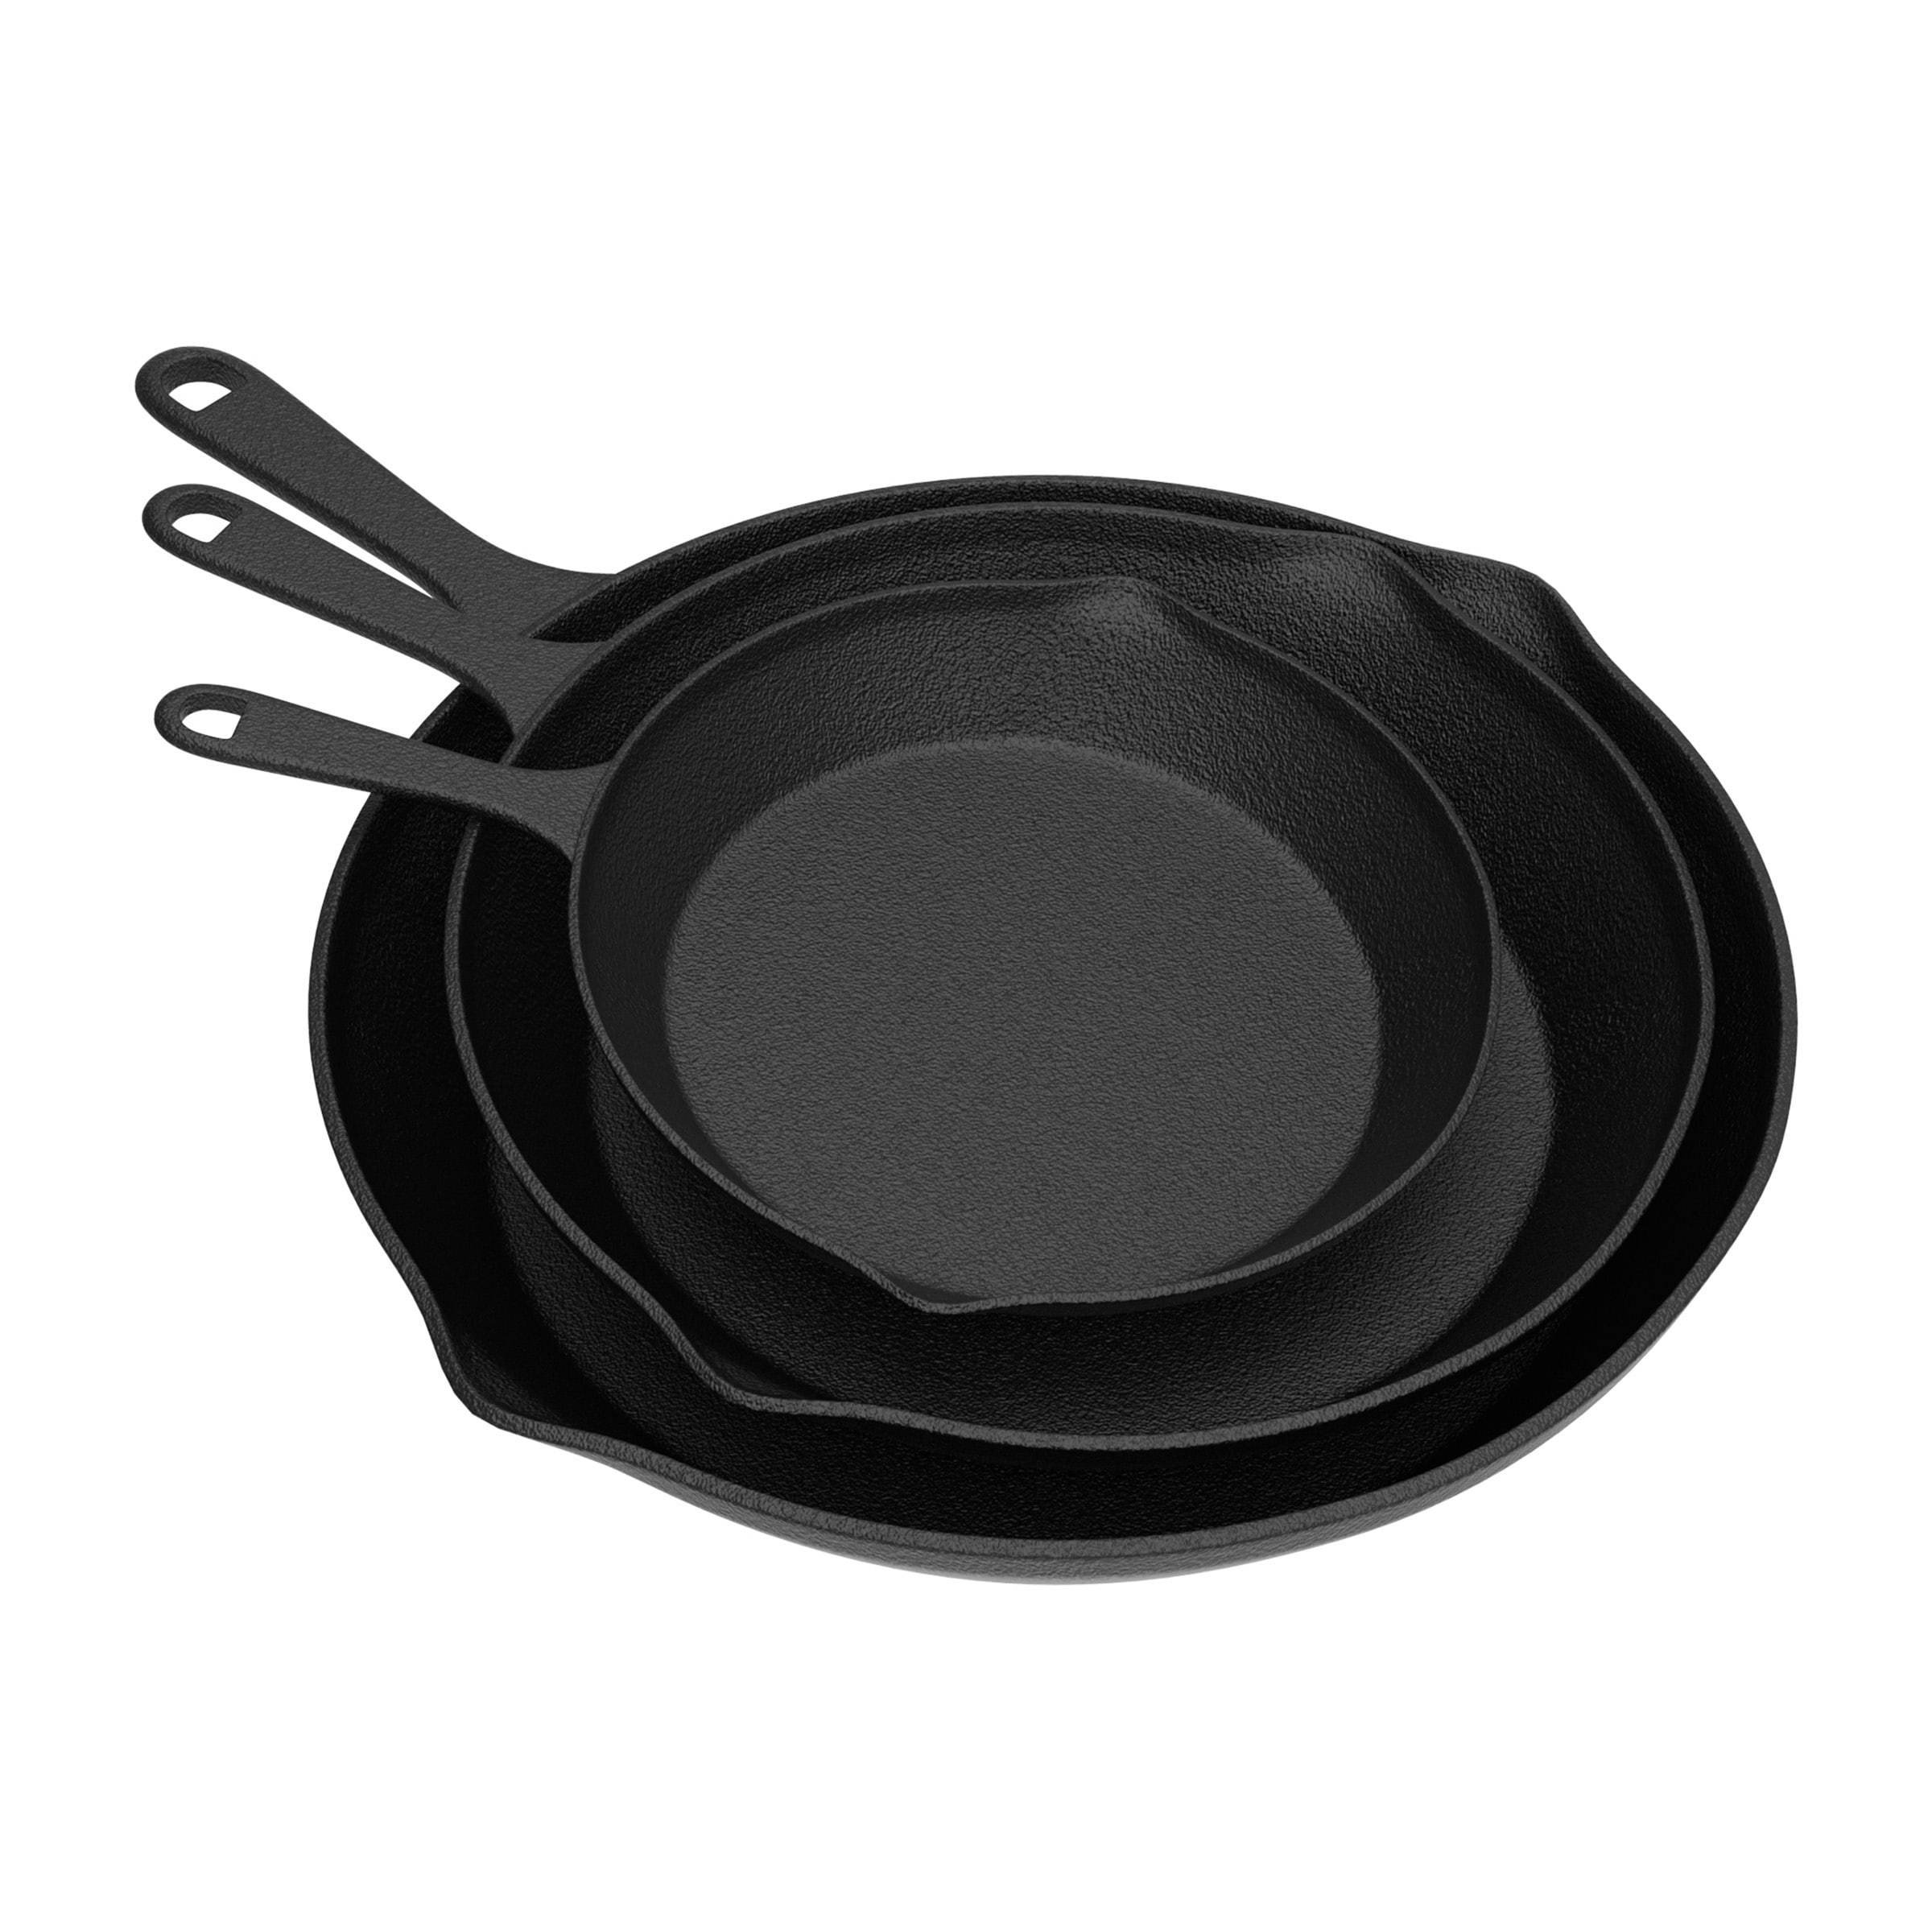 https://ak1.ostkcdn.com/images/products/is/images/direct/d569e456465247e55f308e40b14e1522acf6bb62/Frying-Pans-Set-of-3-Cast-Iron-Pre-Seasoned-Nonstick-Skillets-by-Home-Complete.jpg